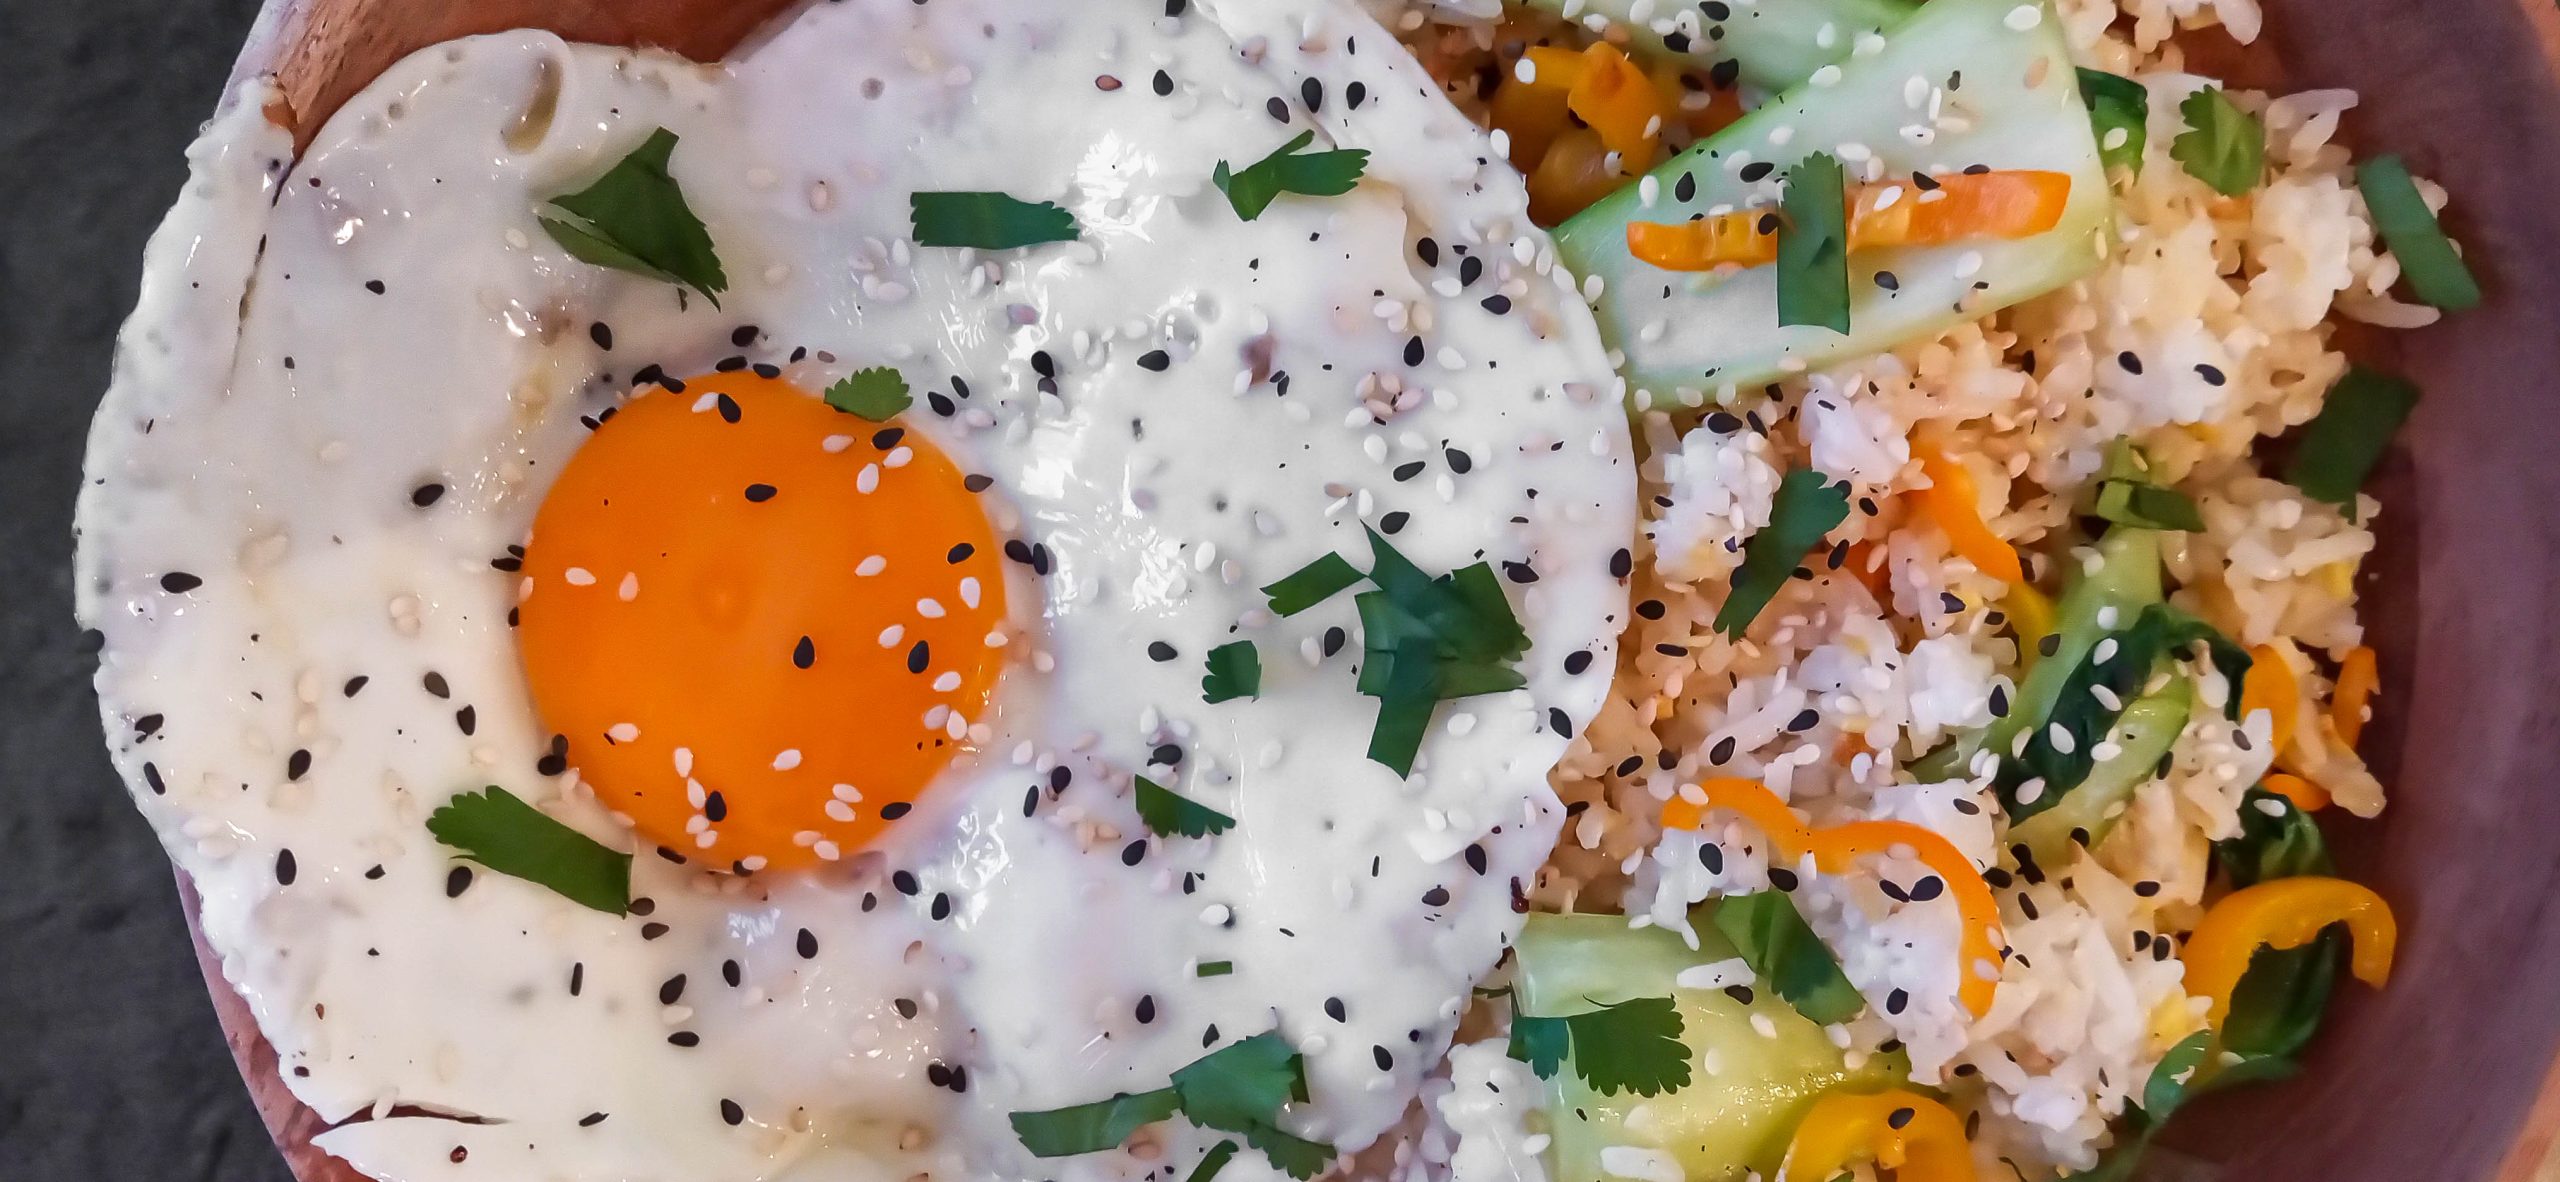 Fried rice with vegetables and fried egg